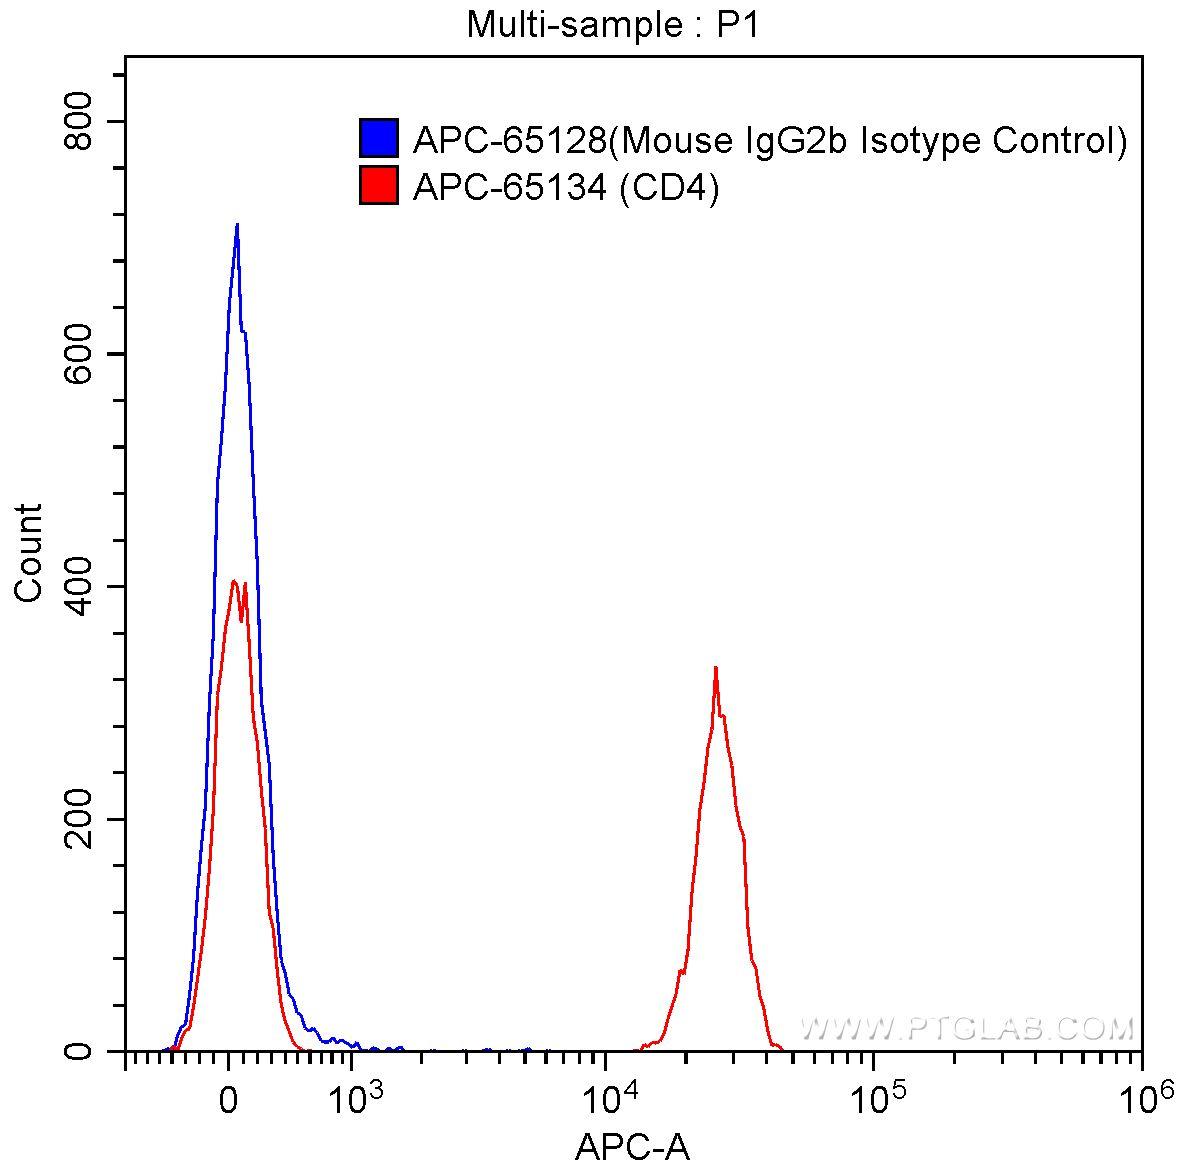 1X10^6 human peripheral blood lymphocytes were surface stained with0.125 ug APC-anti-human CD4 (APC-65134, clone OKT4) (red) or 0.125 ug APC-mouse IgG2b isotype control (blue). Samples were not fixed.